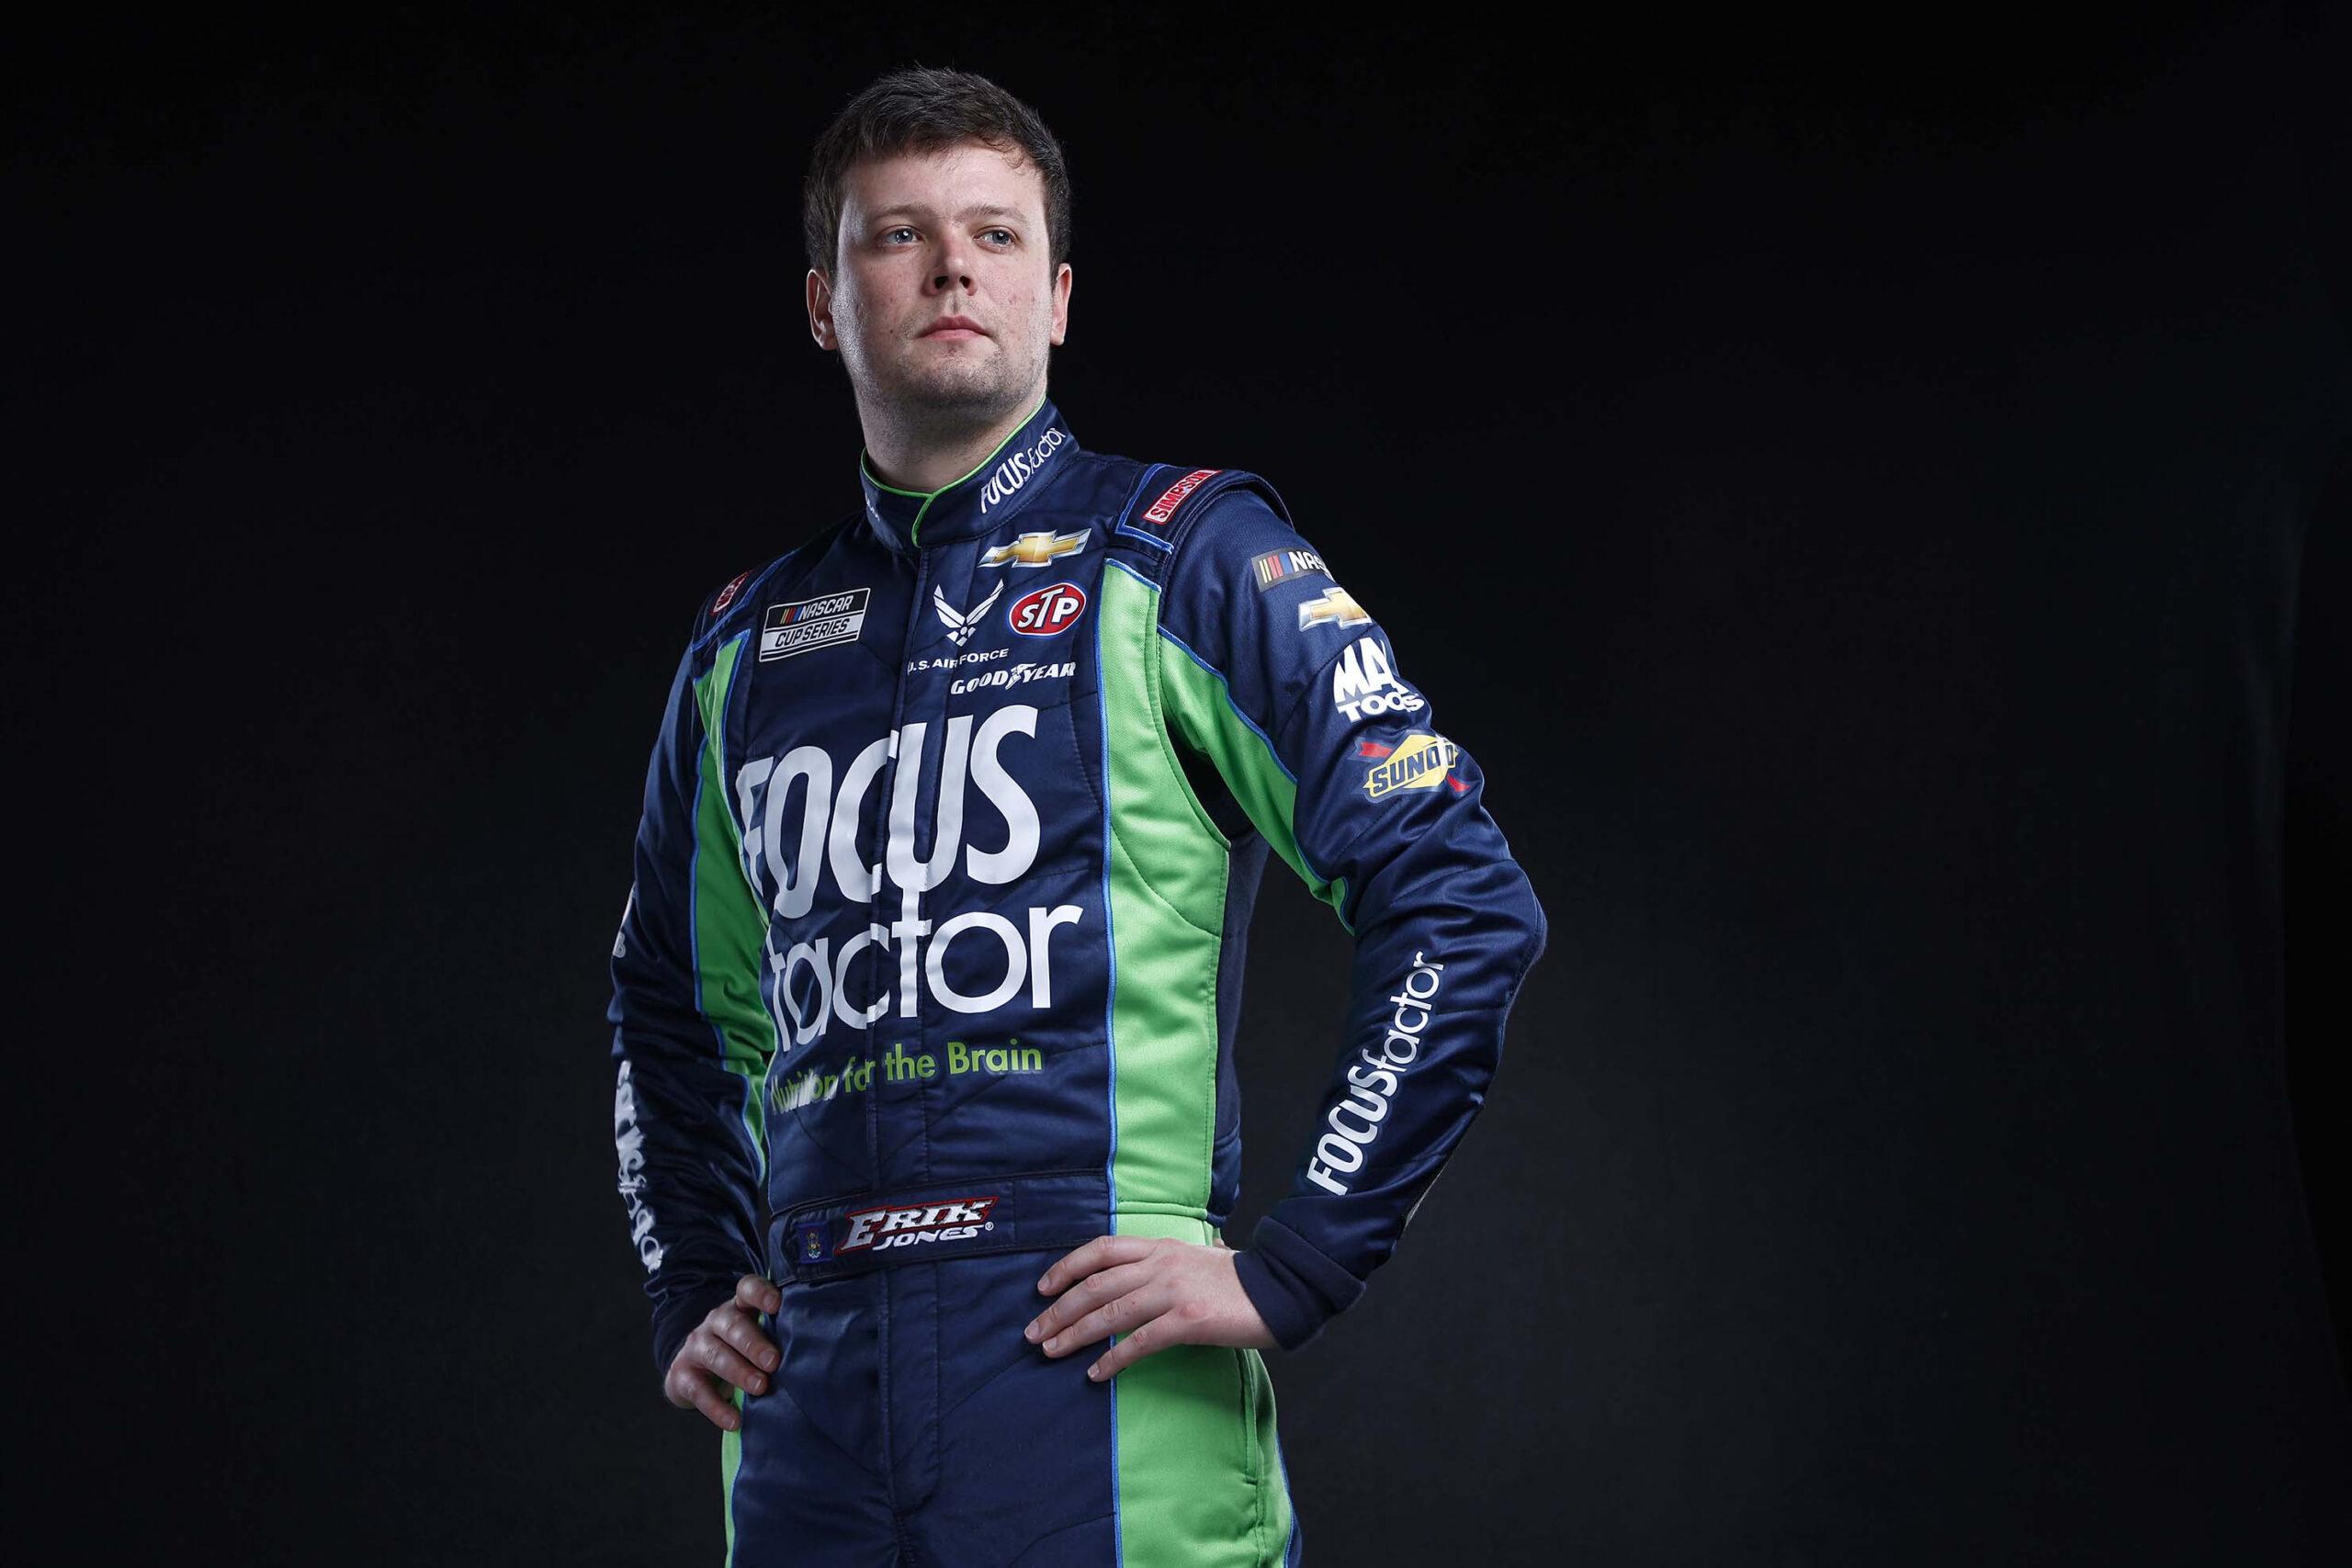 ERIK JONES TO REMAIN IN THE NO. 43 CHEVY WITH PETTY GMS